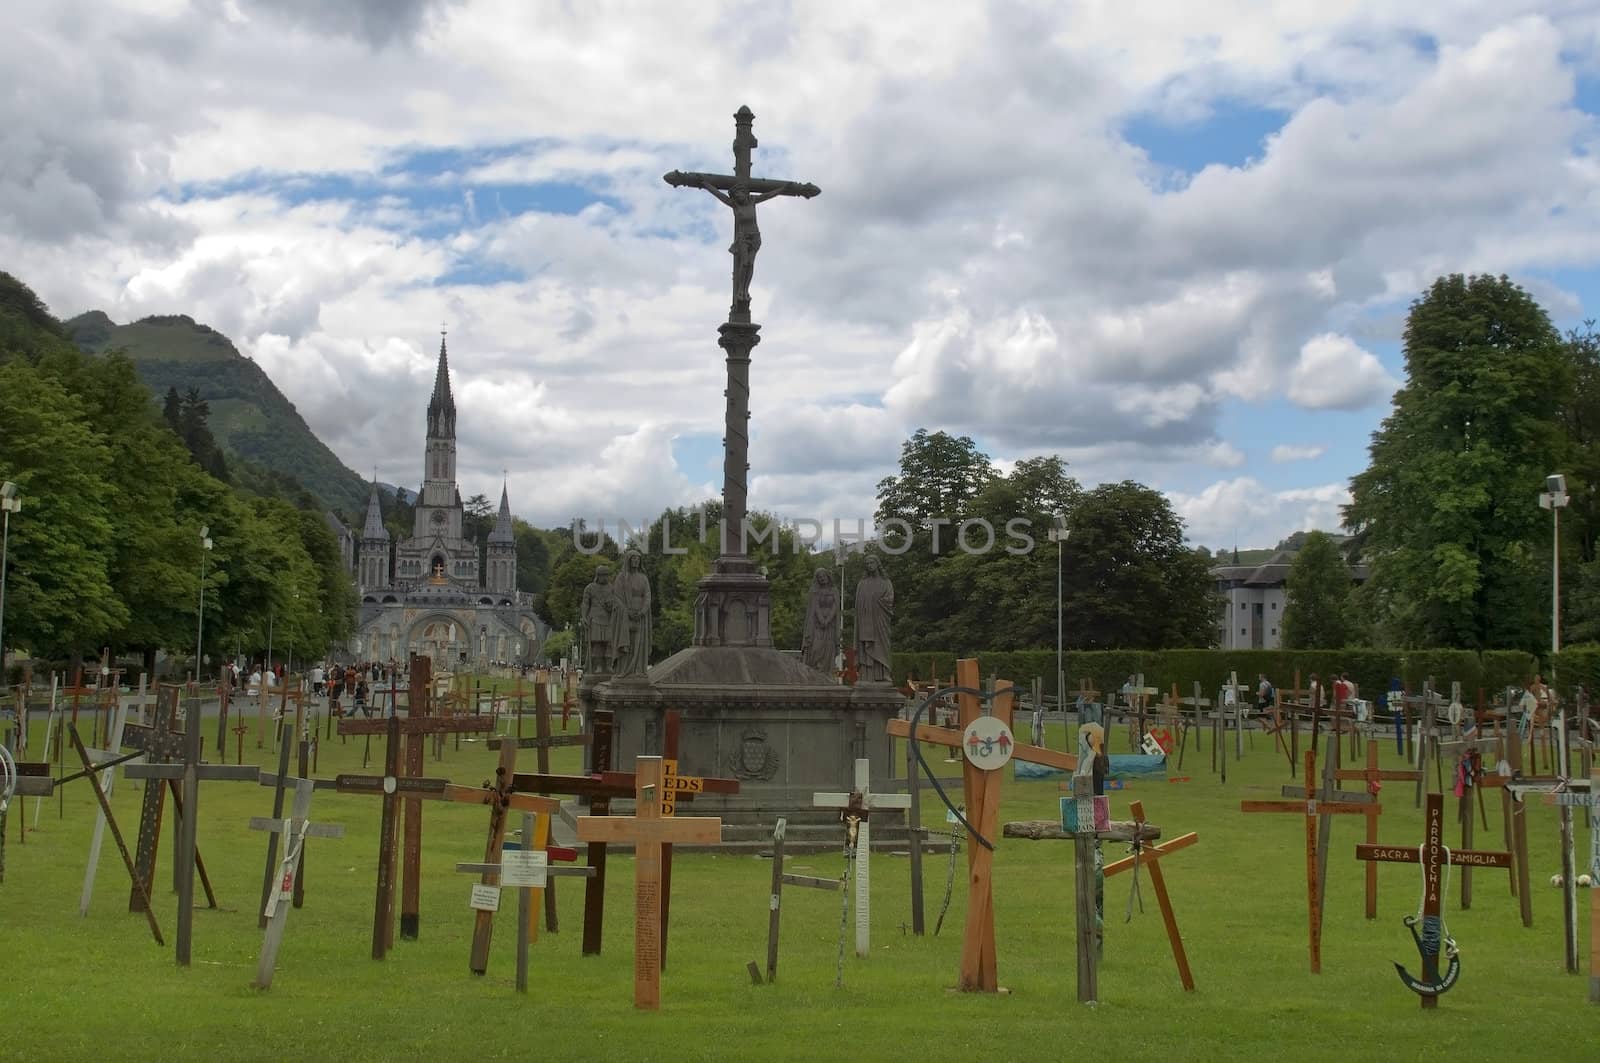 LOURDES, France – July 15: The Basilica of our Lady of the Rosary on July 15, 2012 in Lourdes (France). The Basilica of our Lady of the Rosary is a Roman Catholic church in the Sanctuary of Our Lady of Lourdes ,  garden of crosses